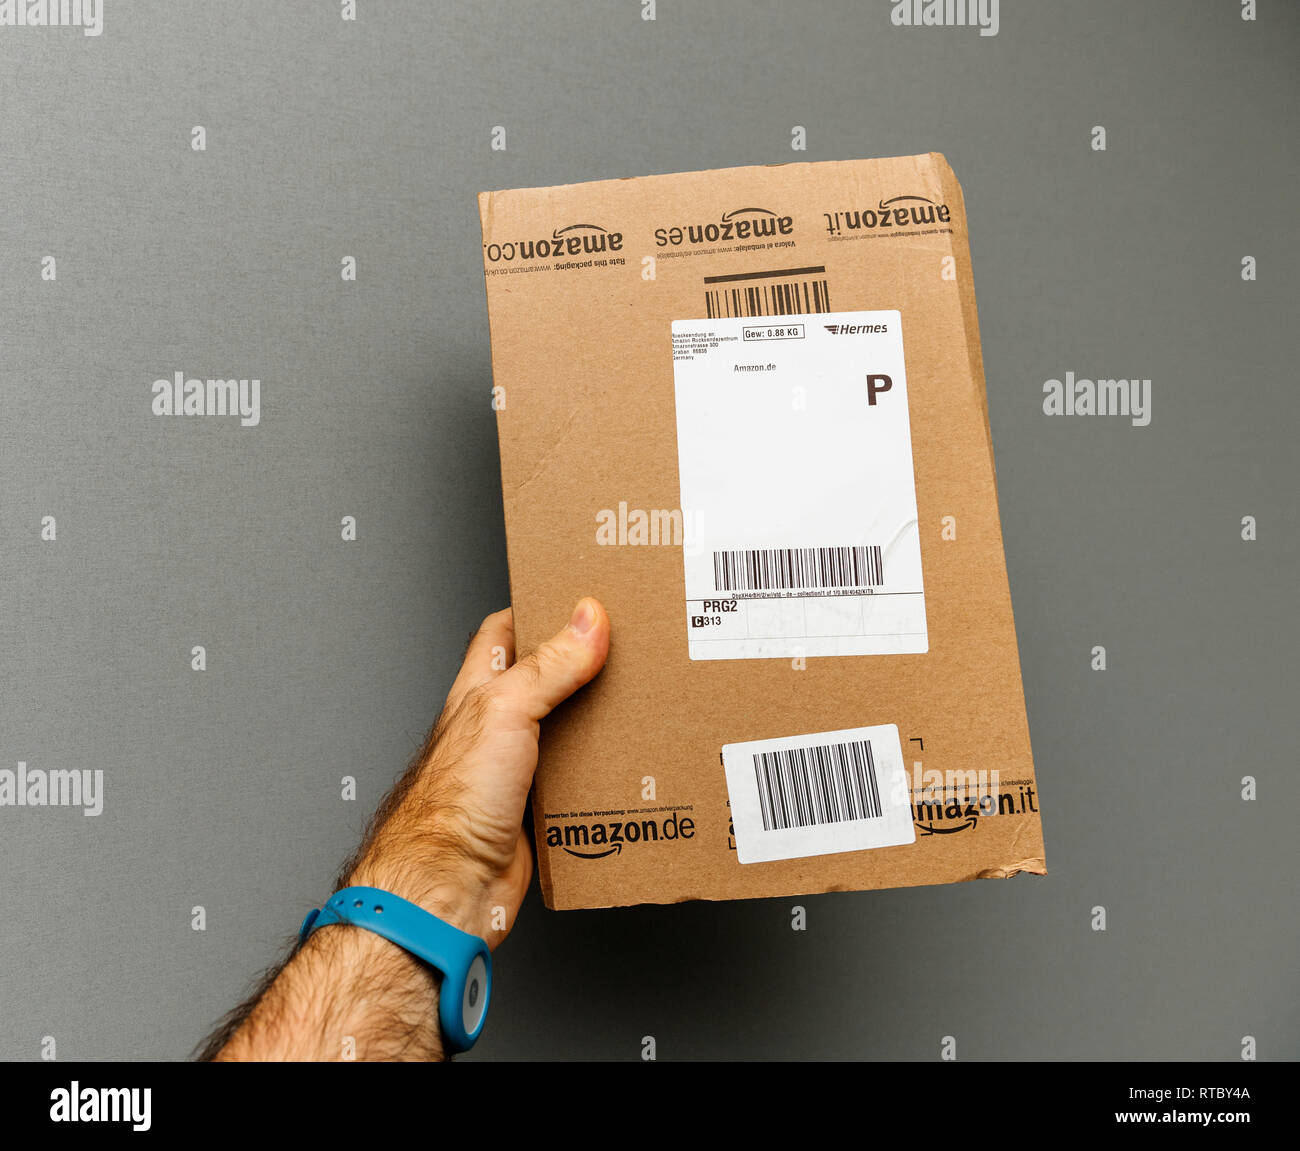 Hermes Parcel Delivery High Resolution Stock Photography and Images - Alamy